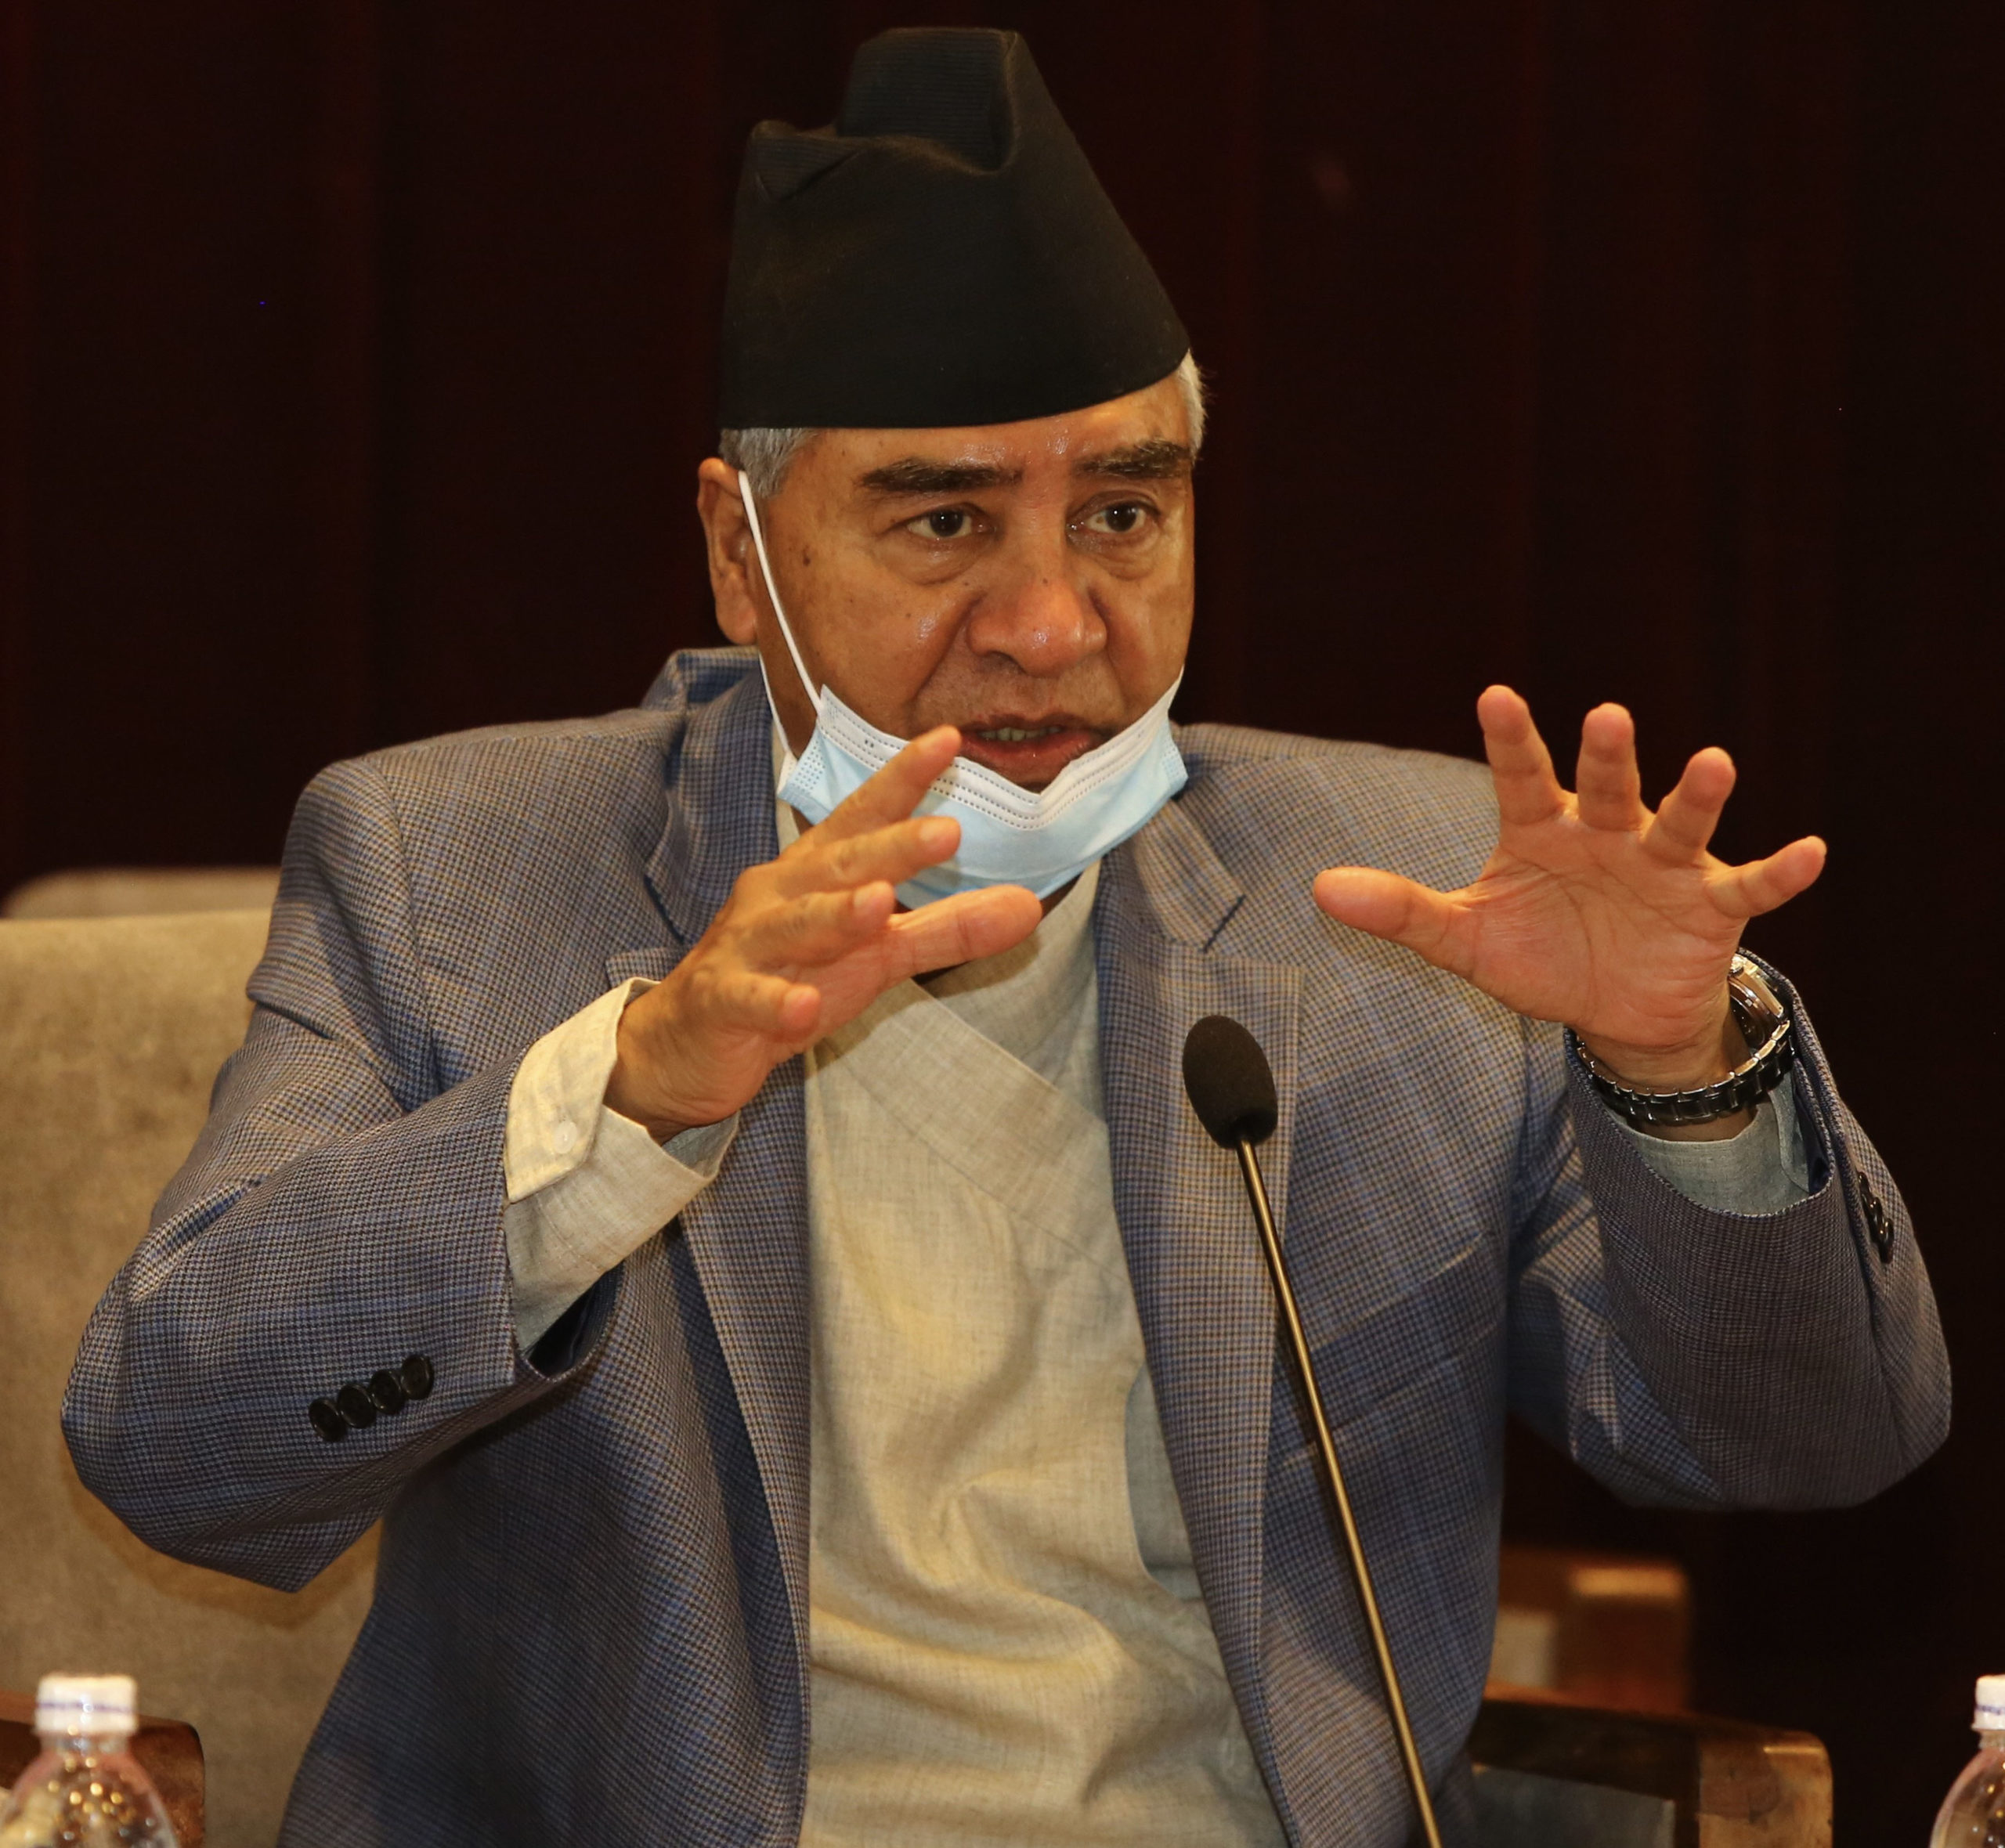 PM Deuba challenges former King Gyanendra to contest polls